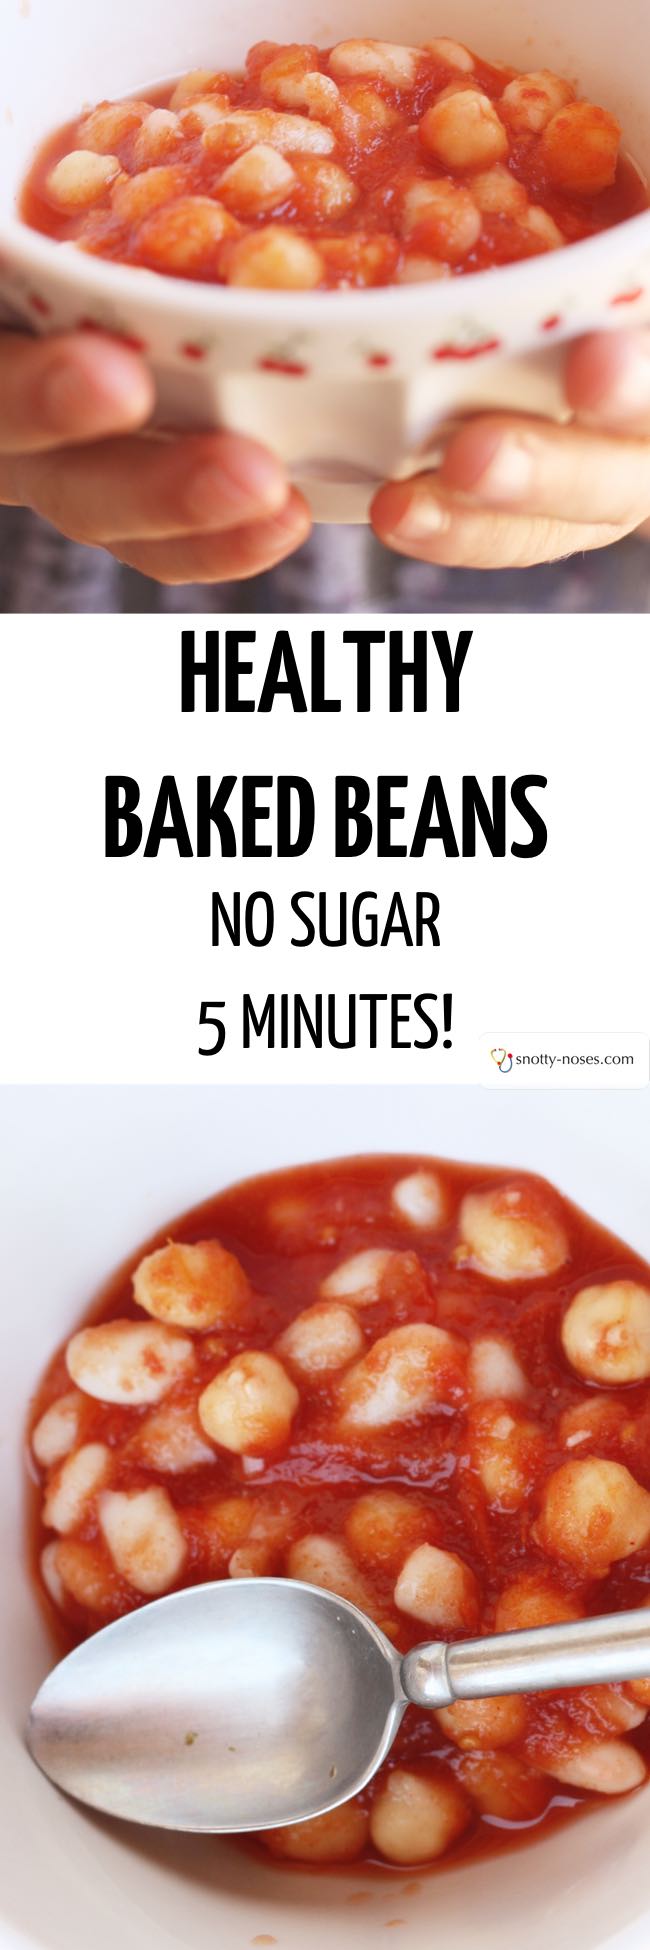 EHealthy Baked beans no sugar, no salt. Simple recipe, ready in 5 minutes. My kids LOVE this!.